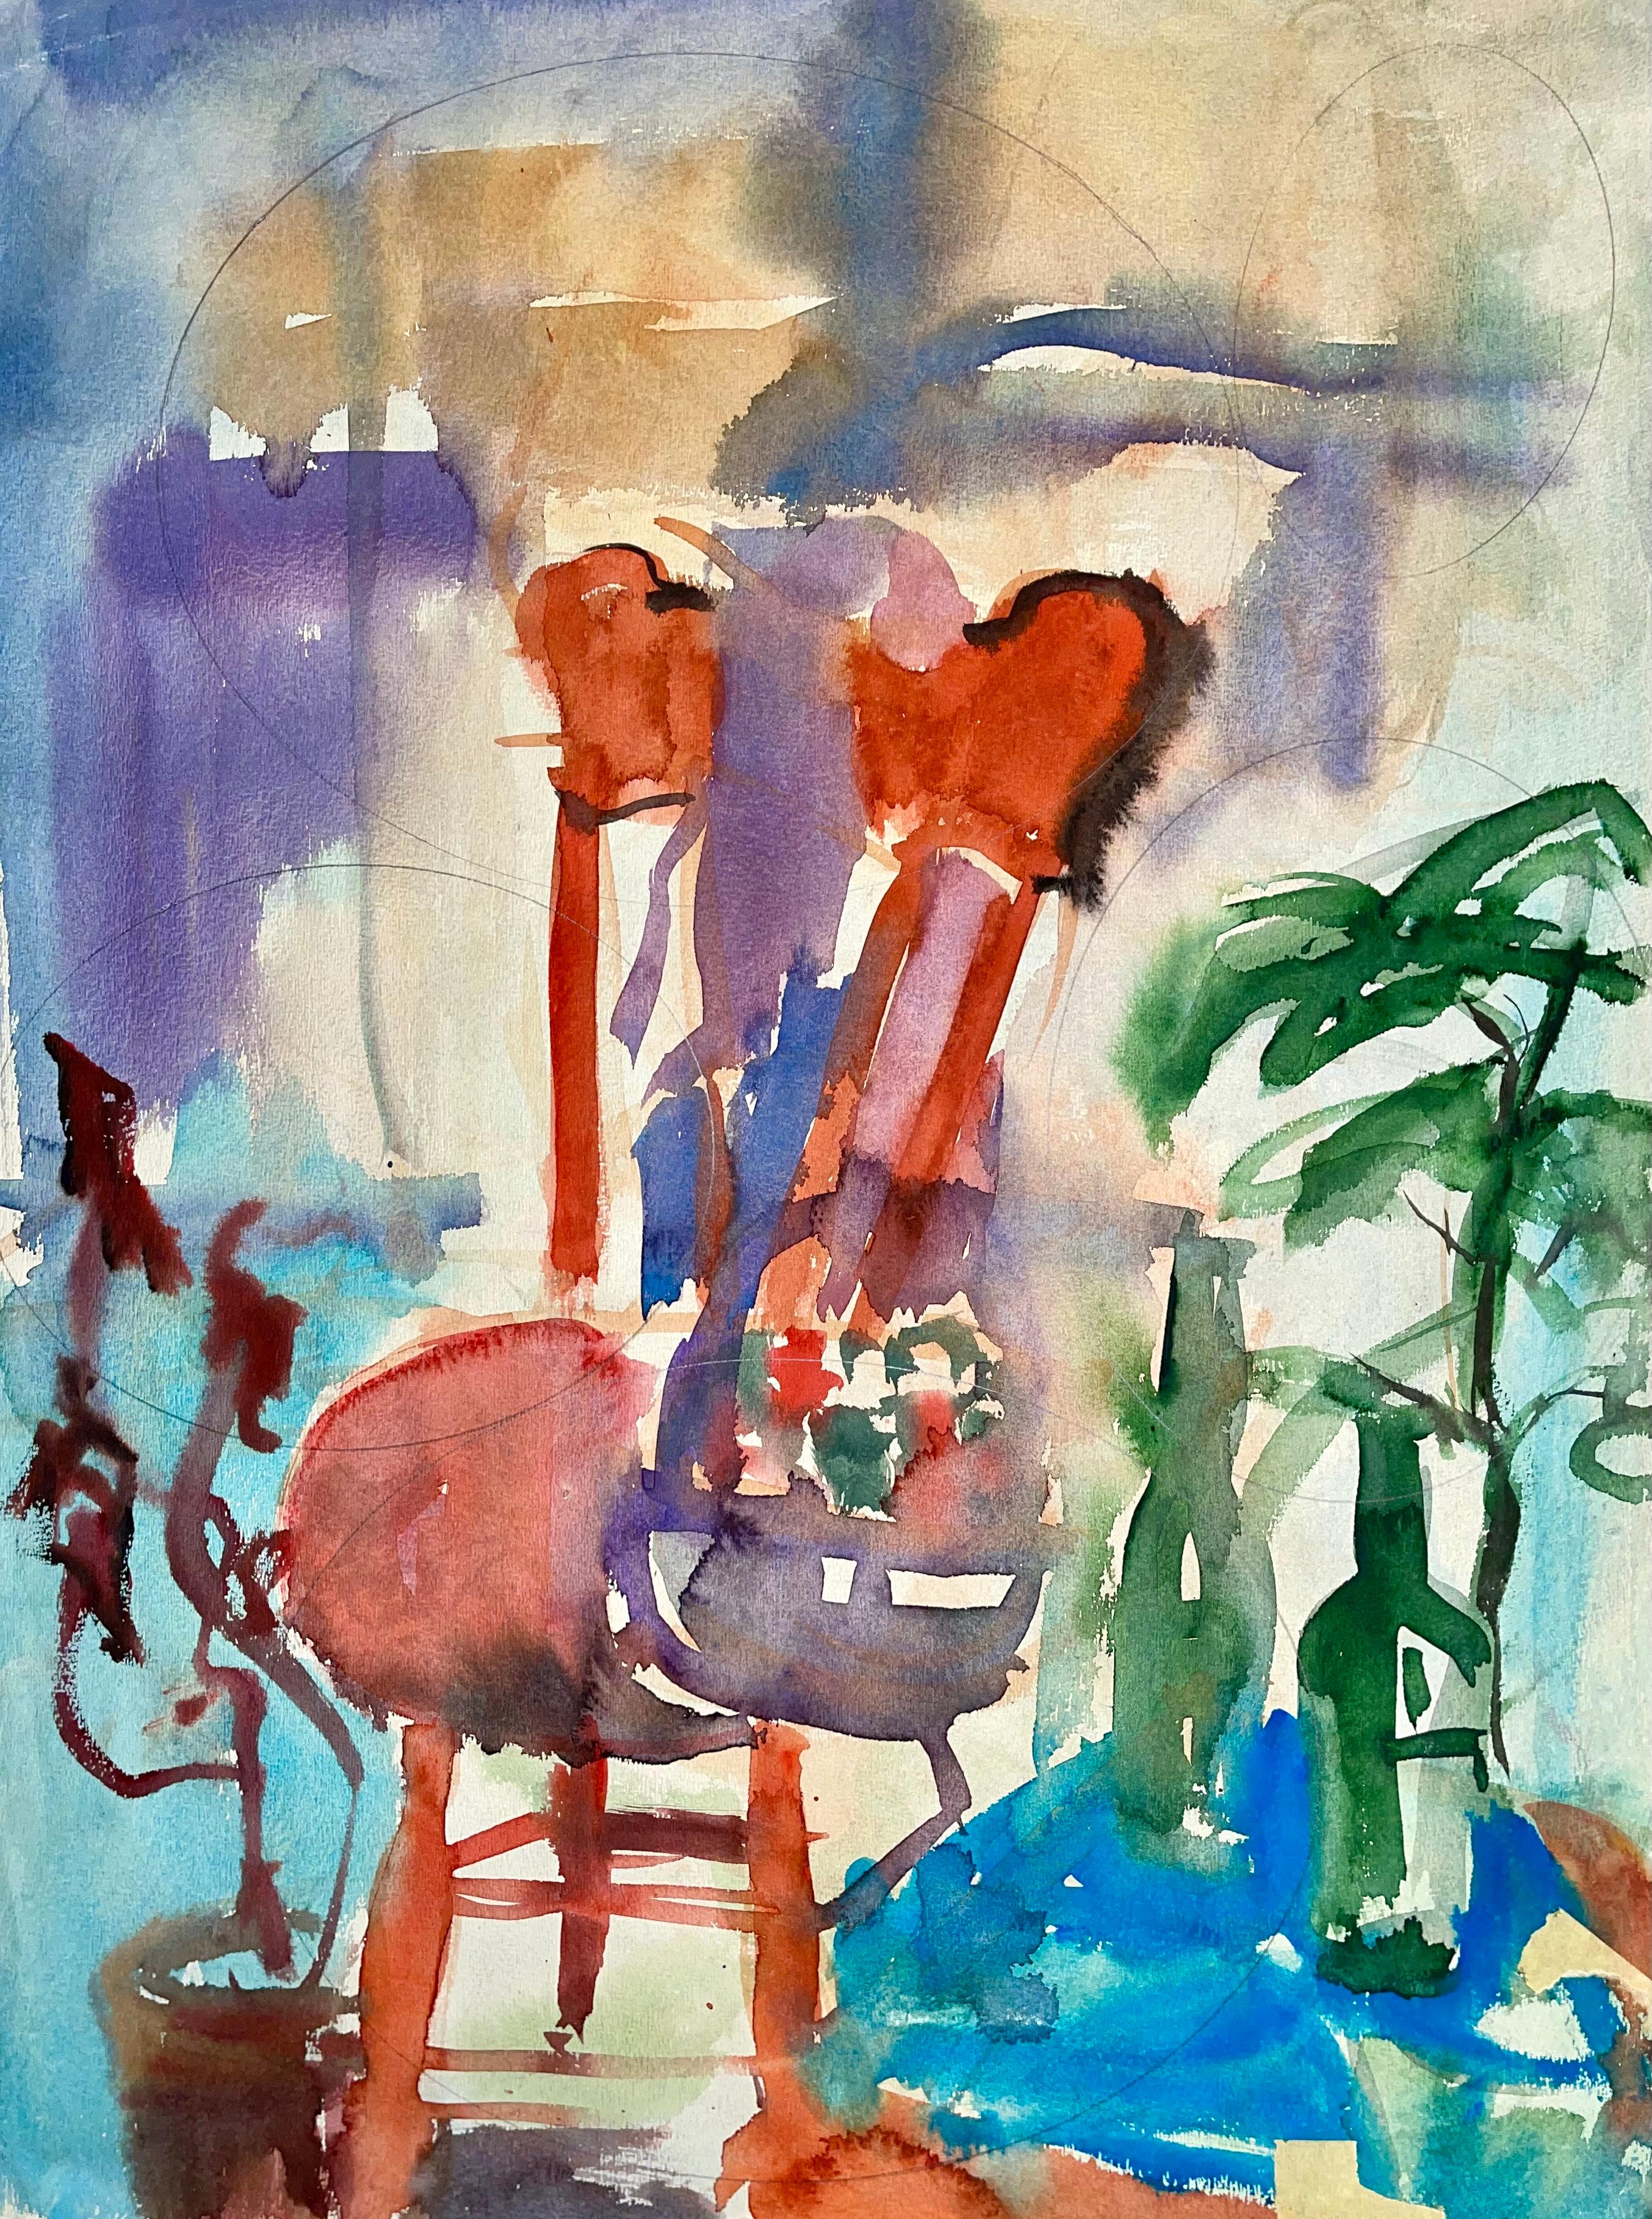 Ian Hornak Interior Painting - Untitled (Abstract Still Life with Chair, Flowers and Bottles)